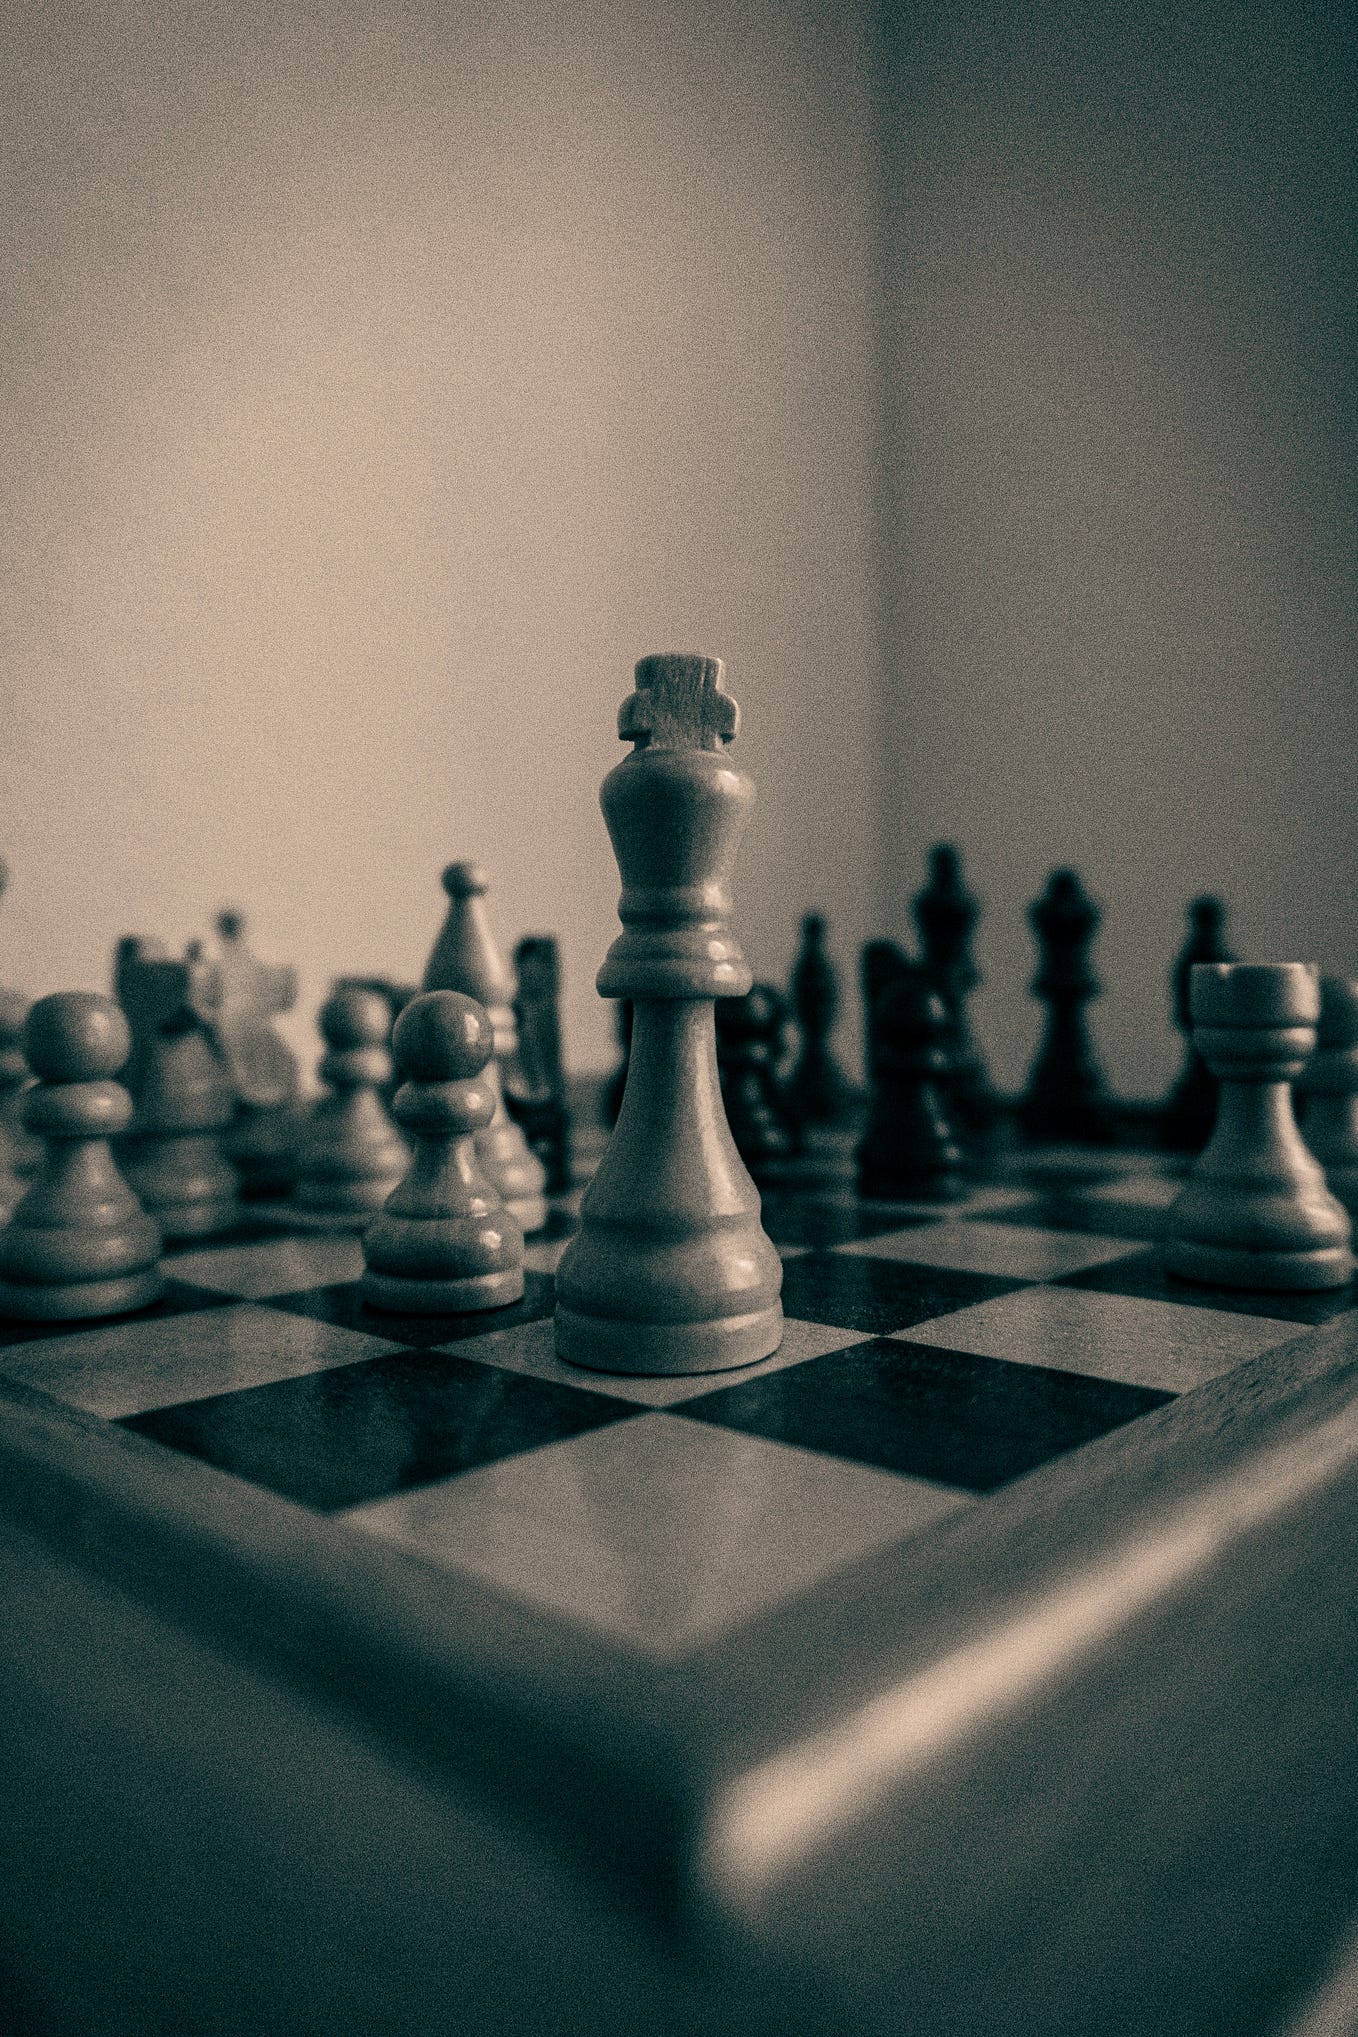 Chessable, Smartick of Chess Teaching?, by Ismail Ali Manik